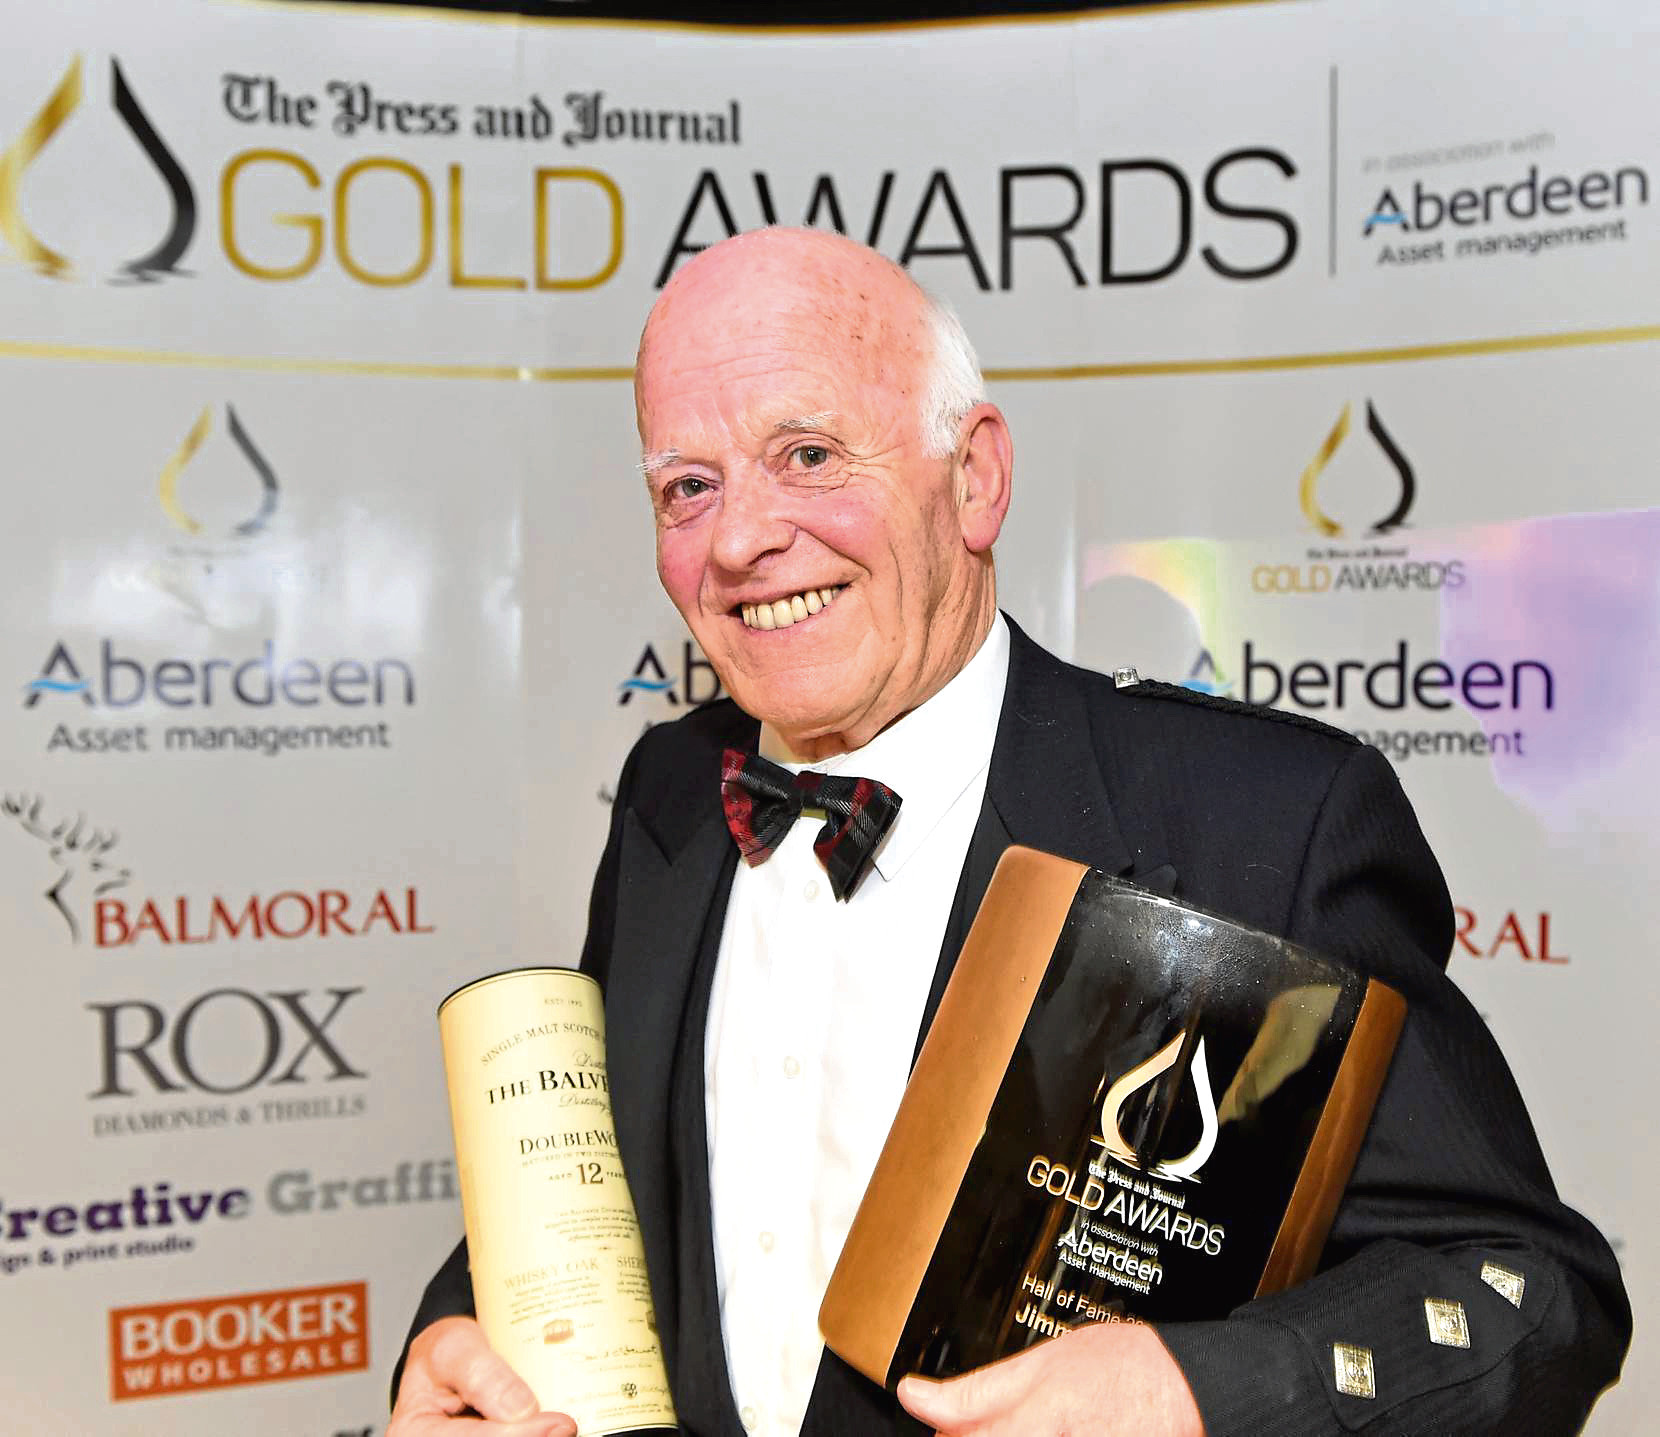 Jim Milne, Managing Director and Founder of Balmoral Group, who previously won the Hall of Fame Award 2016 at the Press and Journal Gold Awards held at the Marcliffe Hotel.